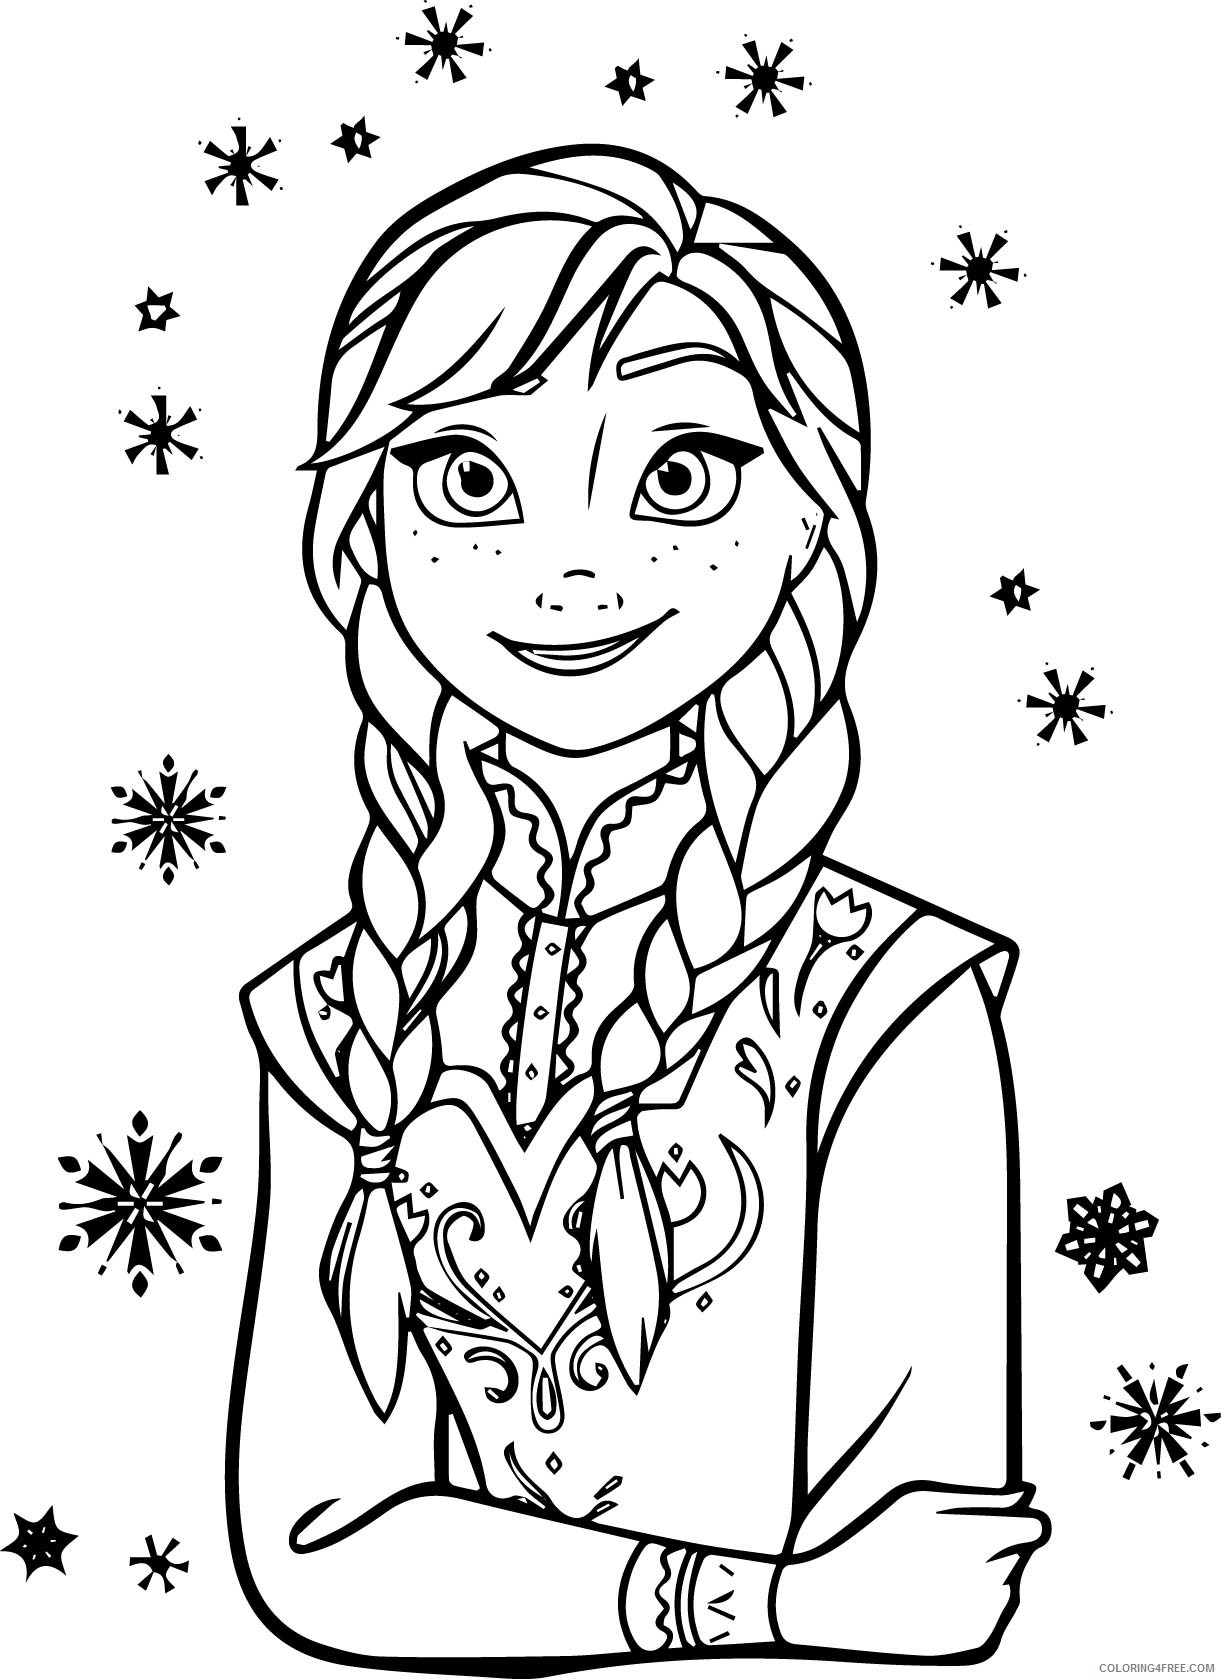 anna coloring pages frozen Coloring4free